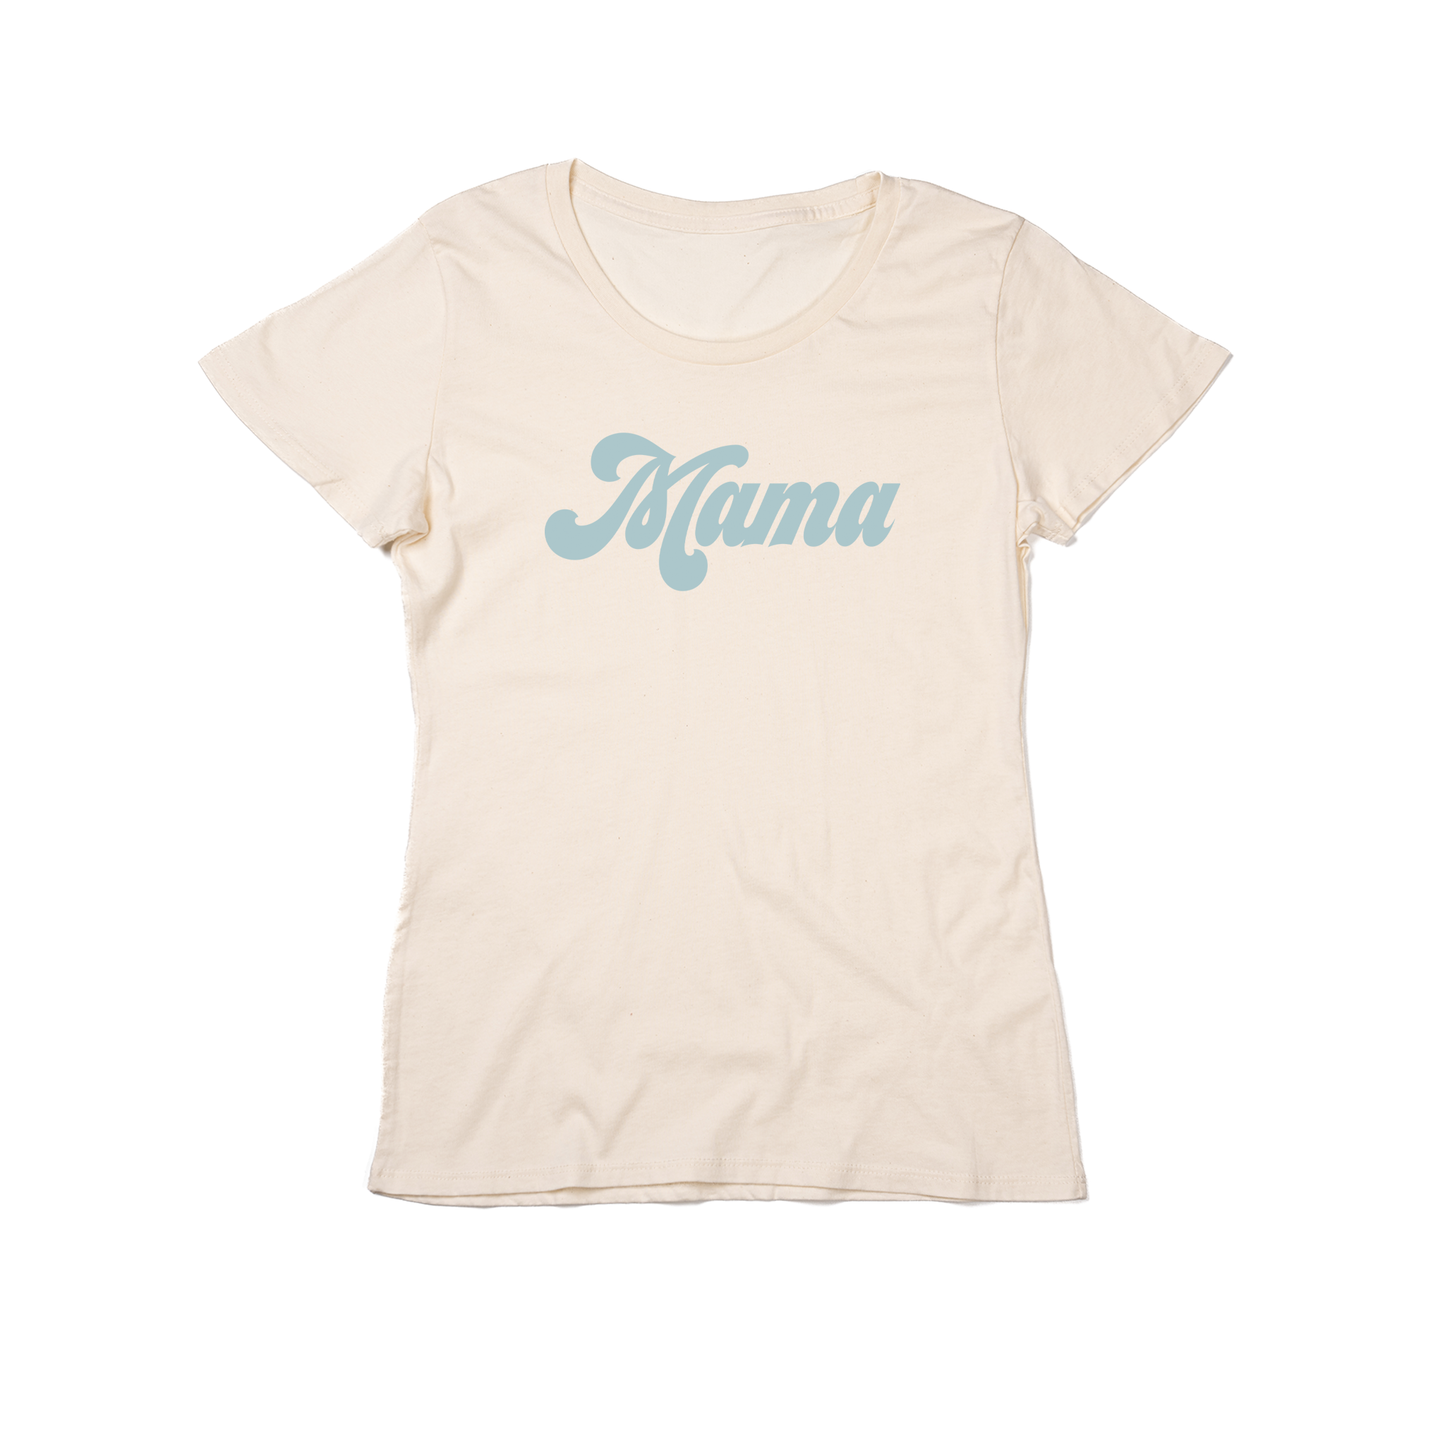 Mama (Retro, Sky) - Women's Fitted Tee (Natural)